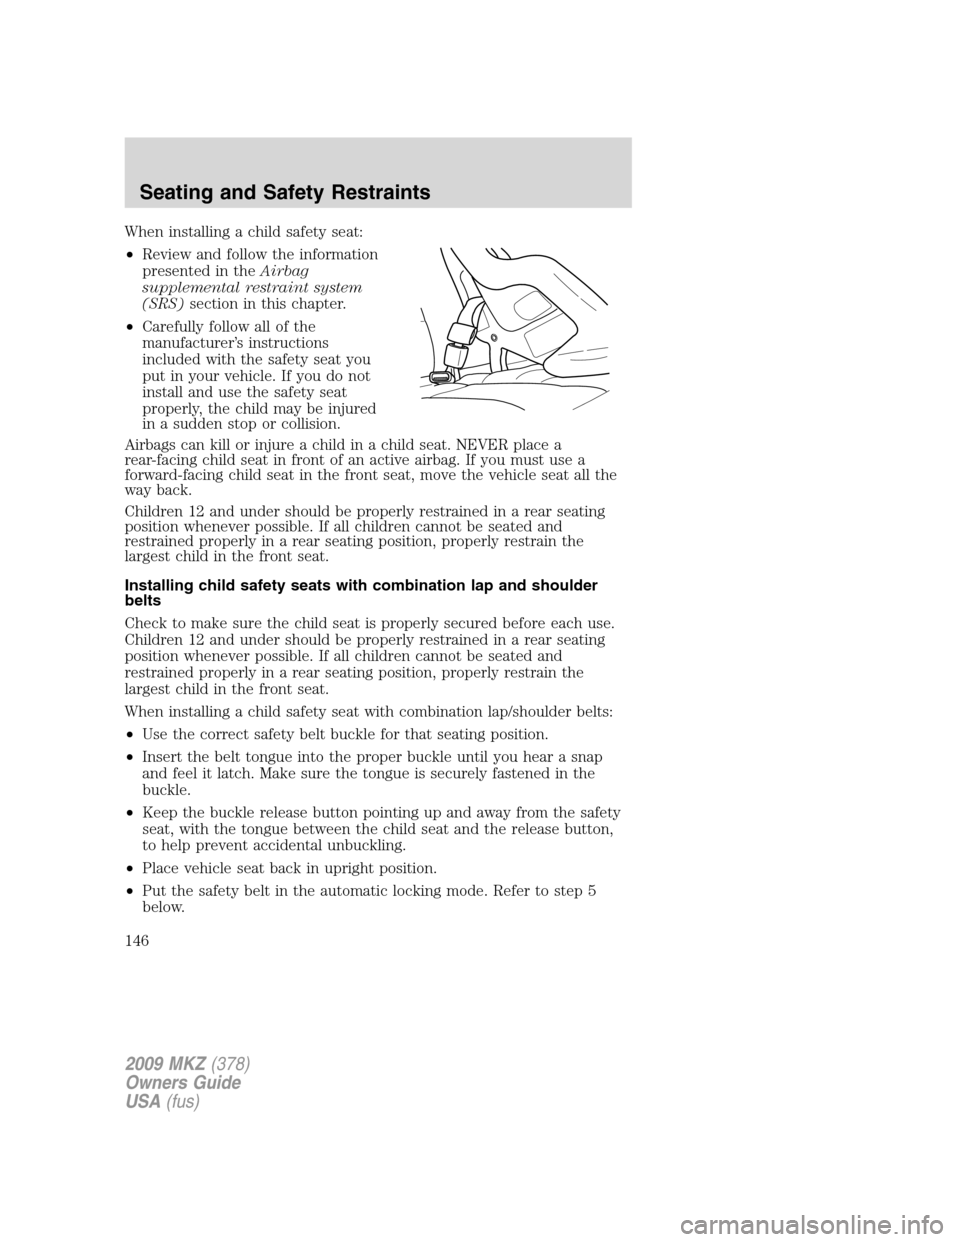 LINCOLN MKZ 2009  Owners Manual When installing a child safety seat:
•Review and follow the information
presented in theAirbag
supplemental restraint system
(SRS)section in this chapter.
•Carefully follow all of the
manufacturer